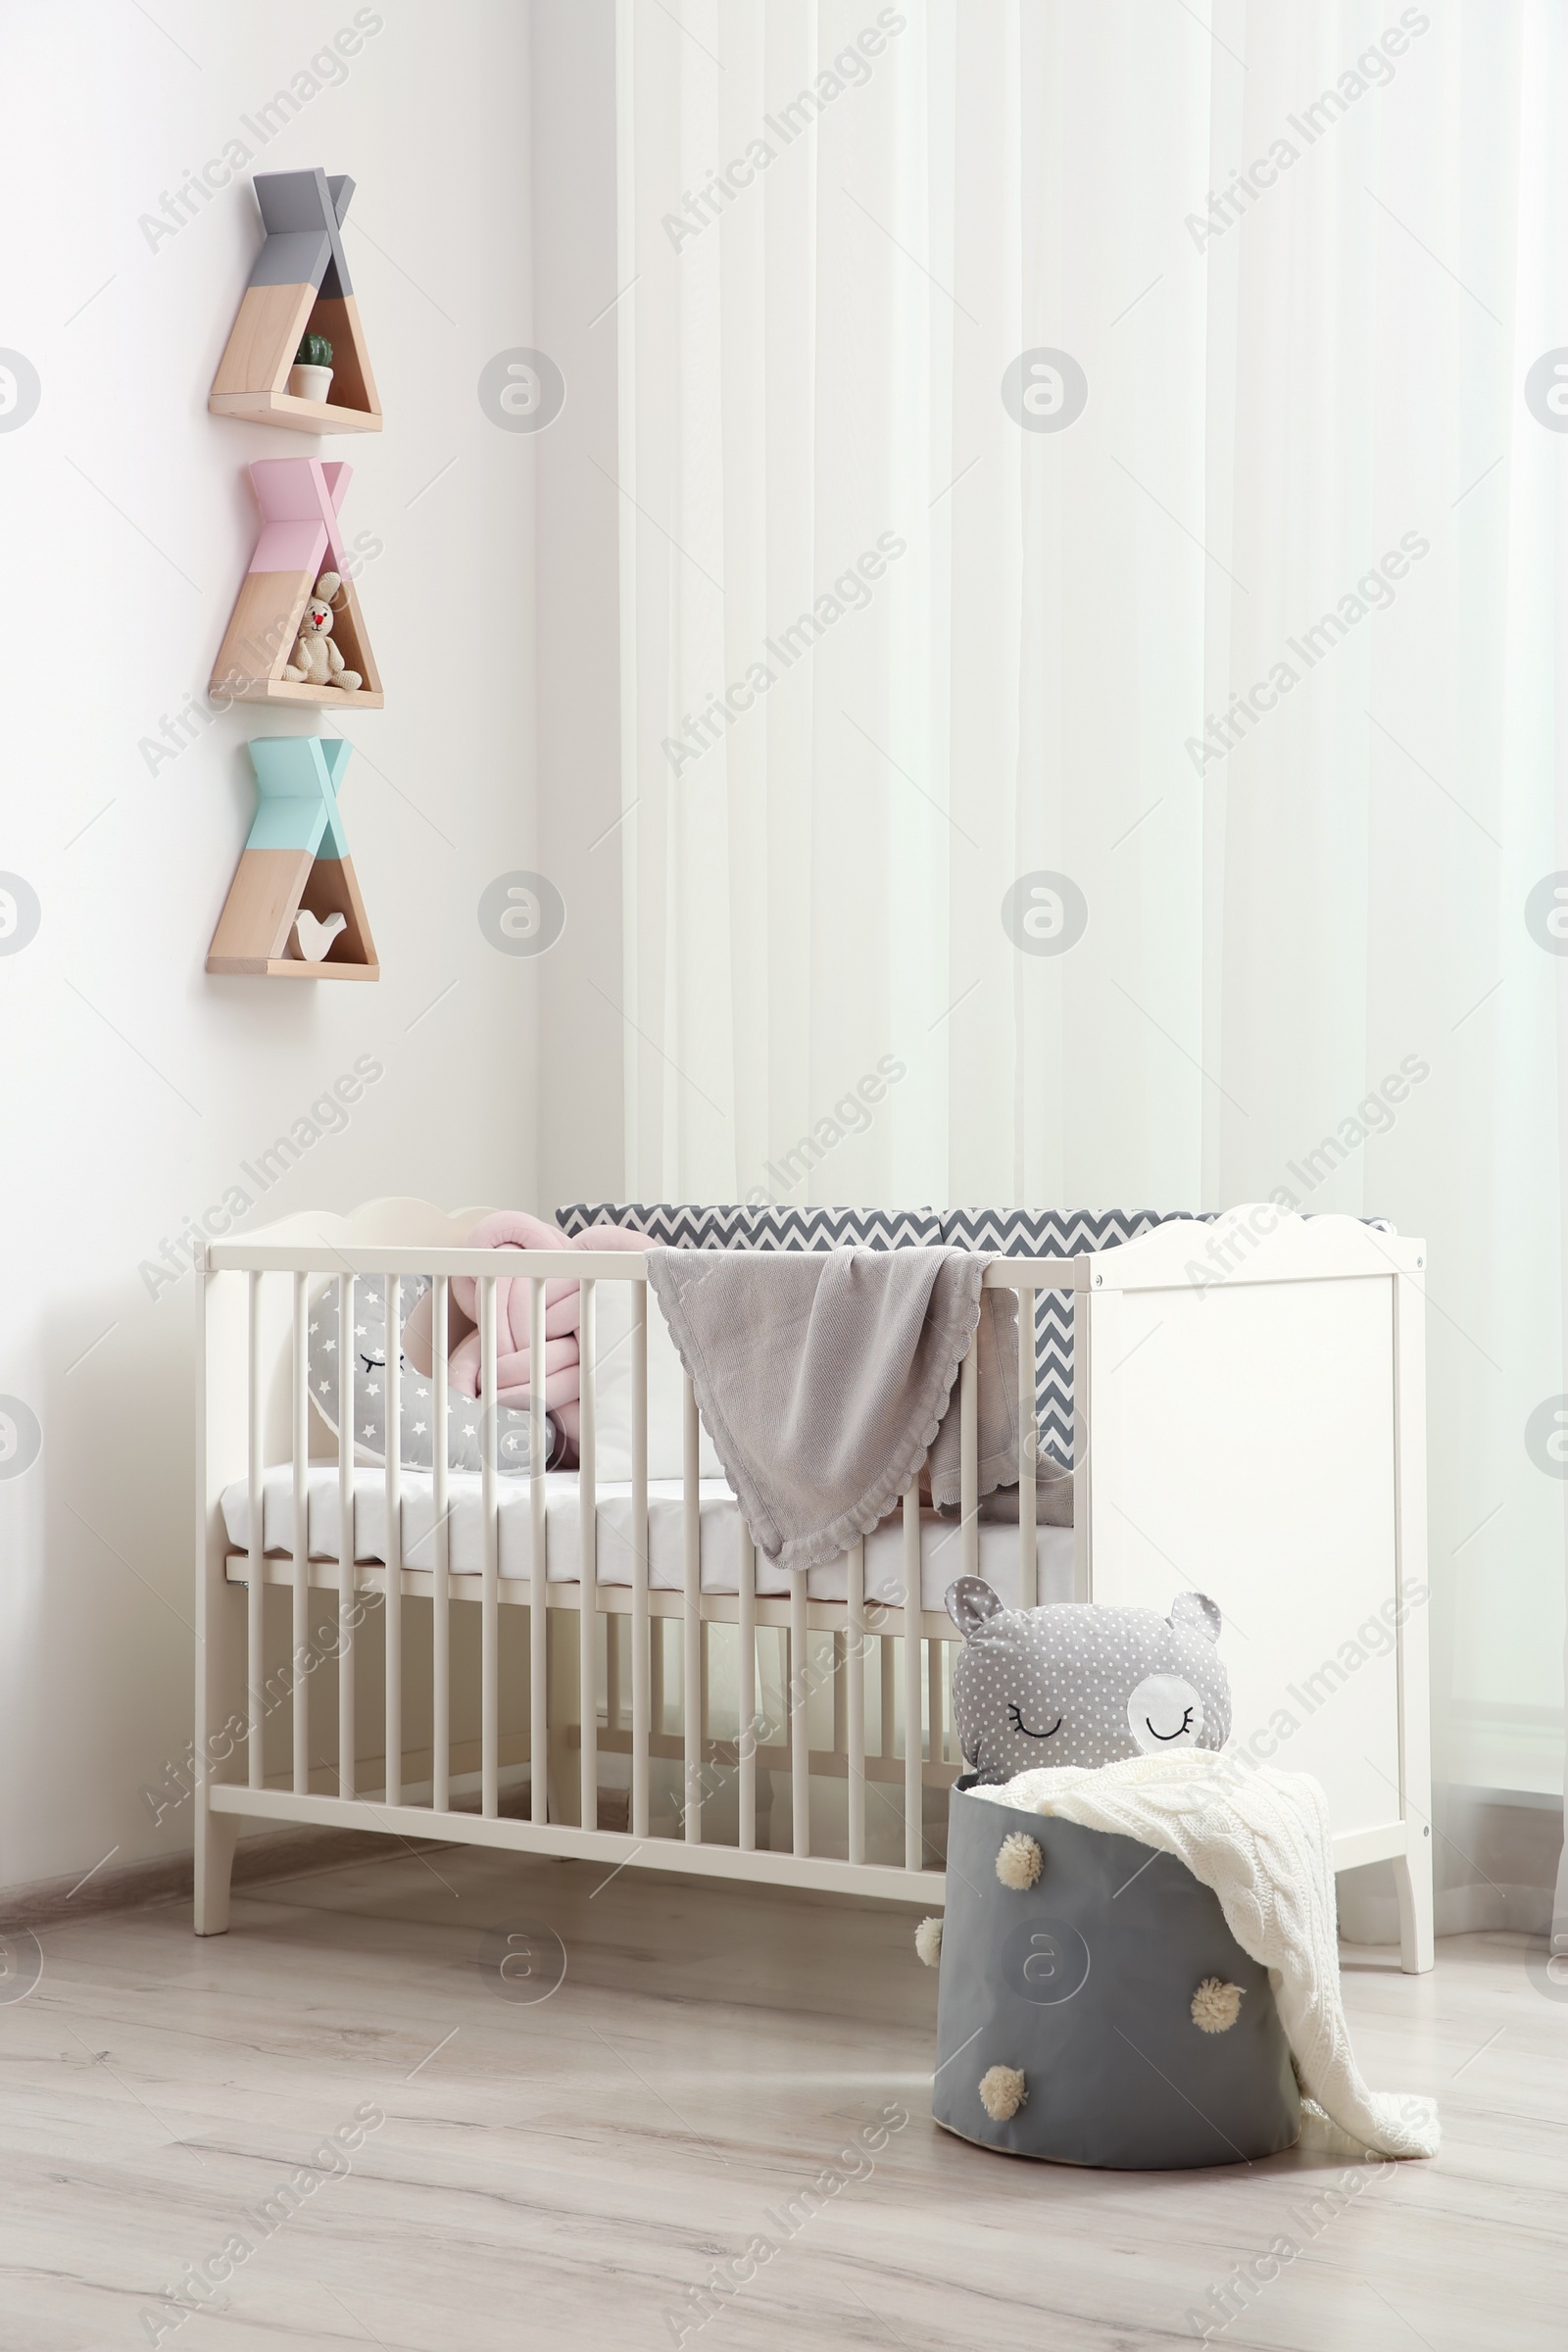 Photo of Wigwam shaped shelves over crib in baby room. Interior design